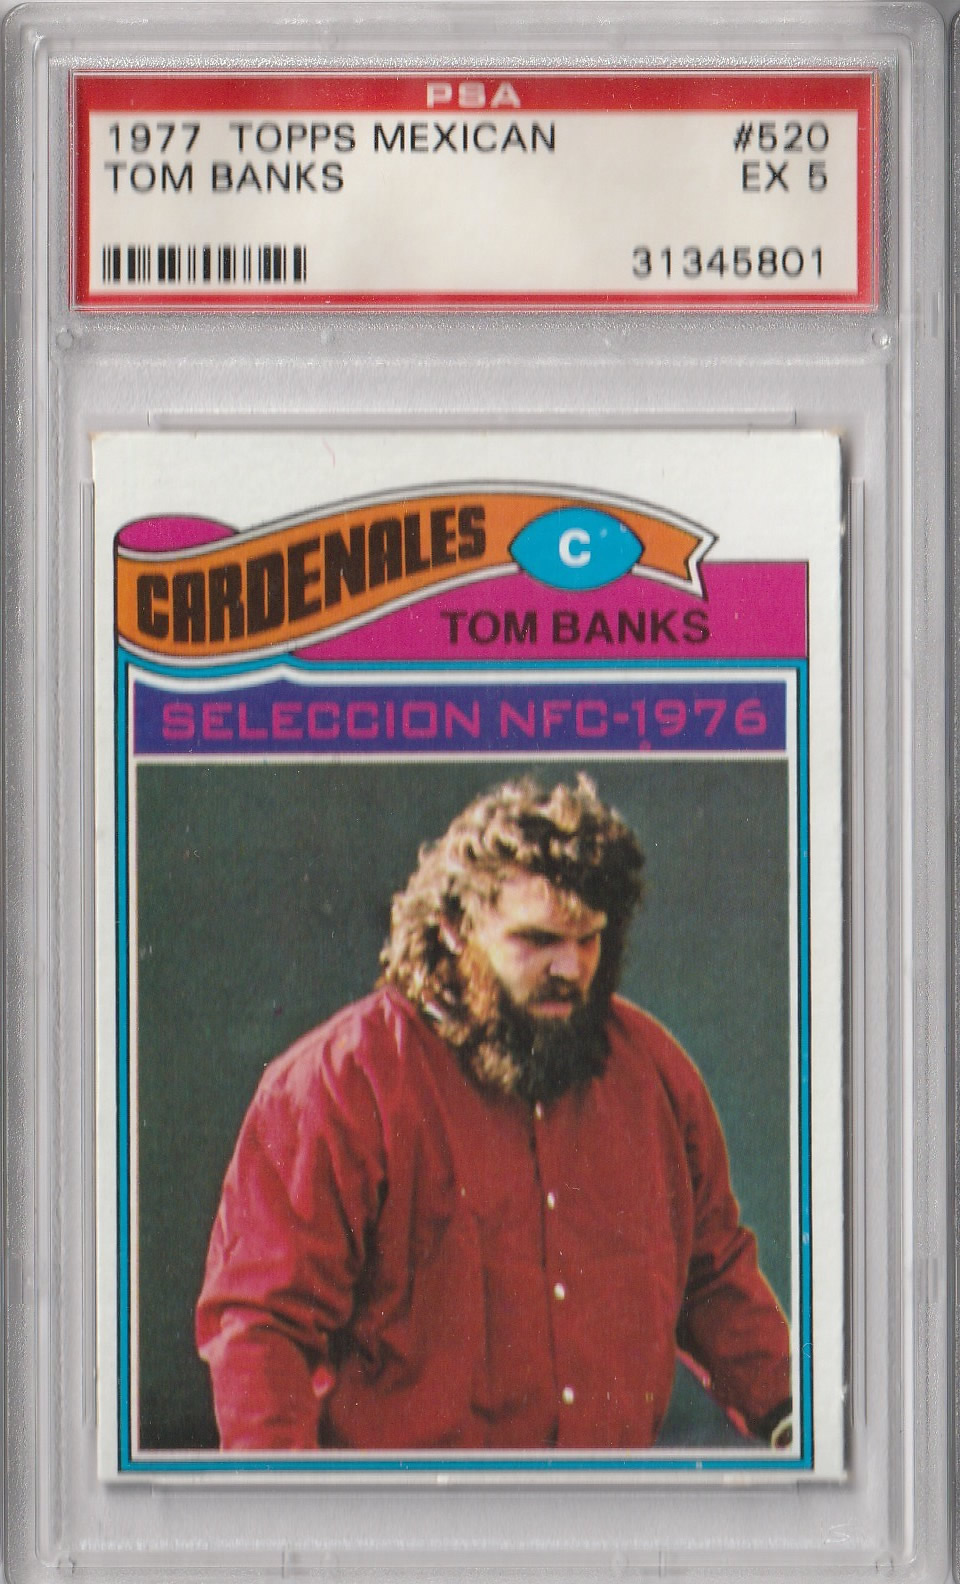 1977 Topps Mexican #520 Tom Banks St. Louis Cardinals PSA 5